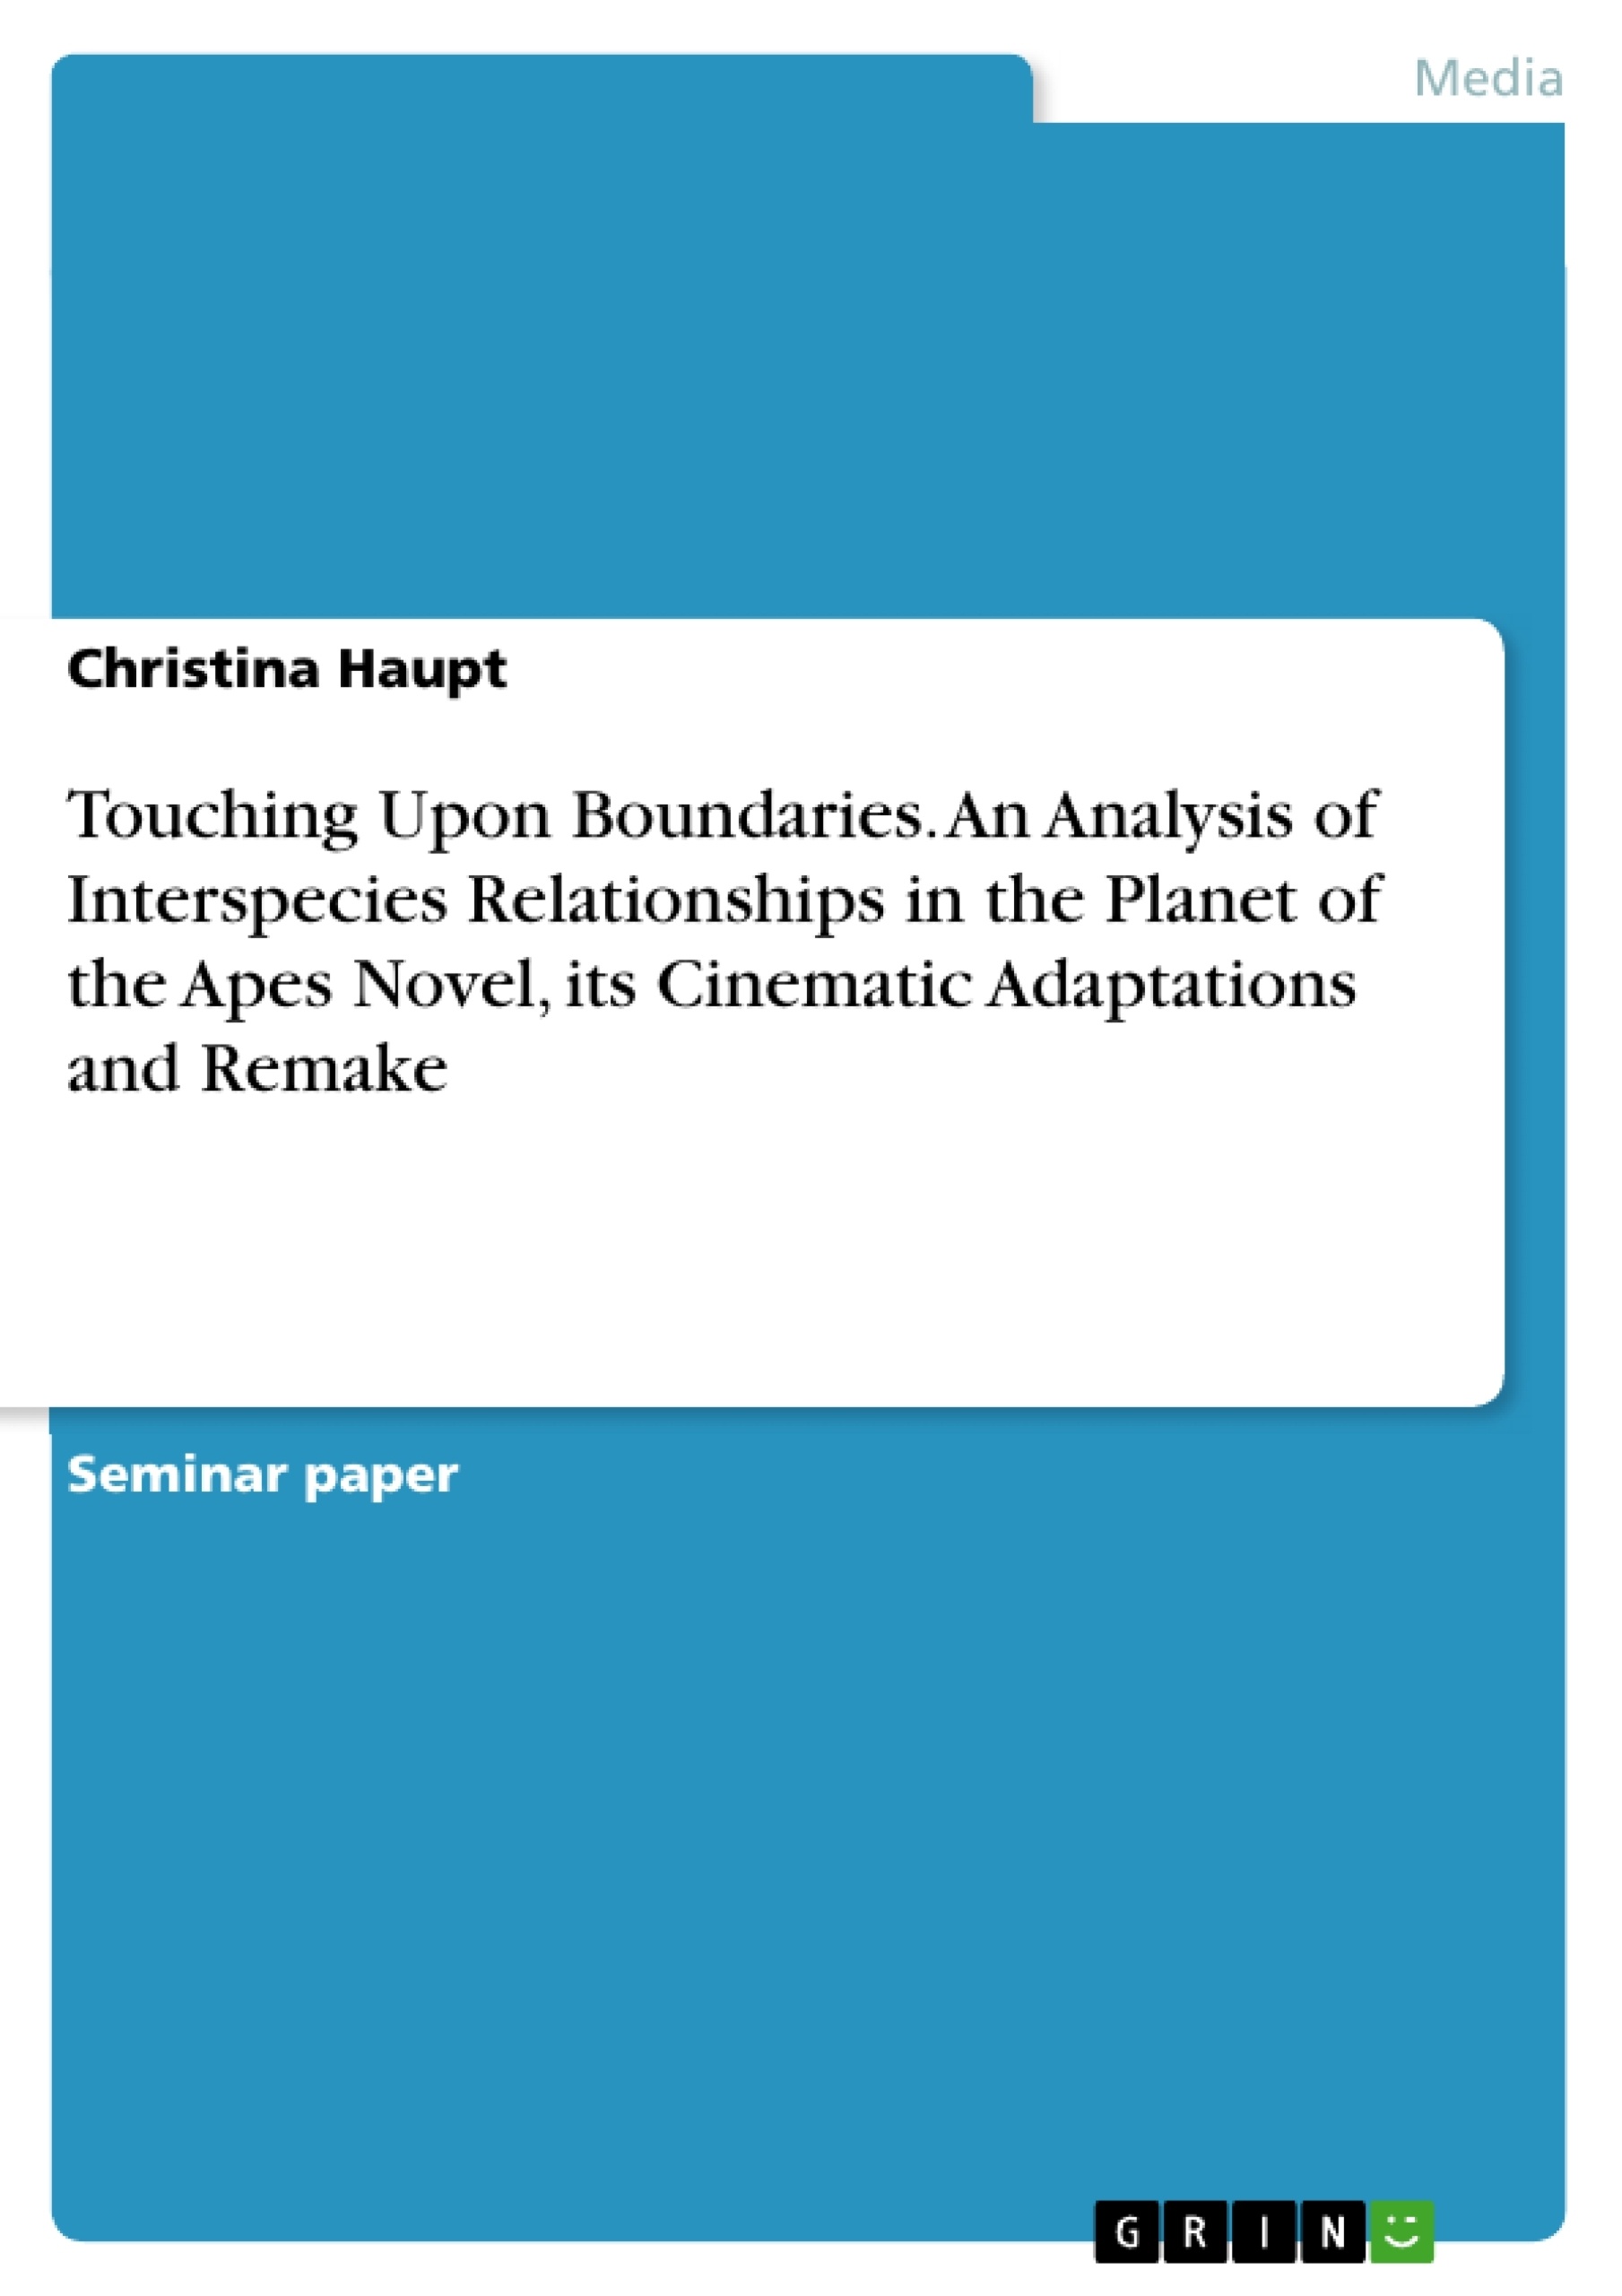 Titre: Touching Upon Boundaries. An Analysis of Interspecies Relationships in the Planet of the Apes Novel, its Cinematic Adaptations and Remake